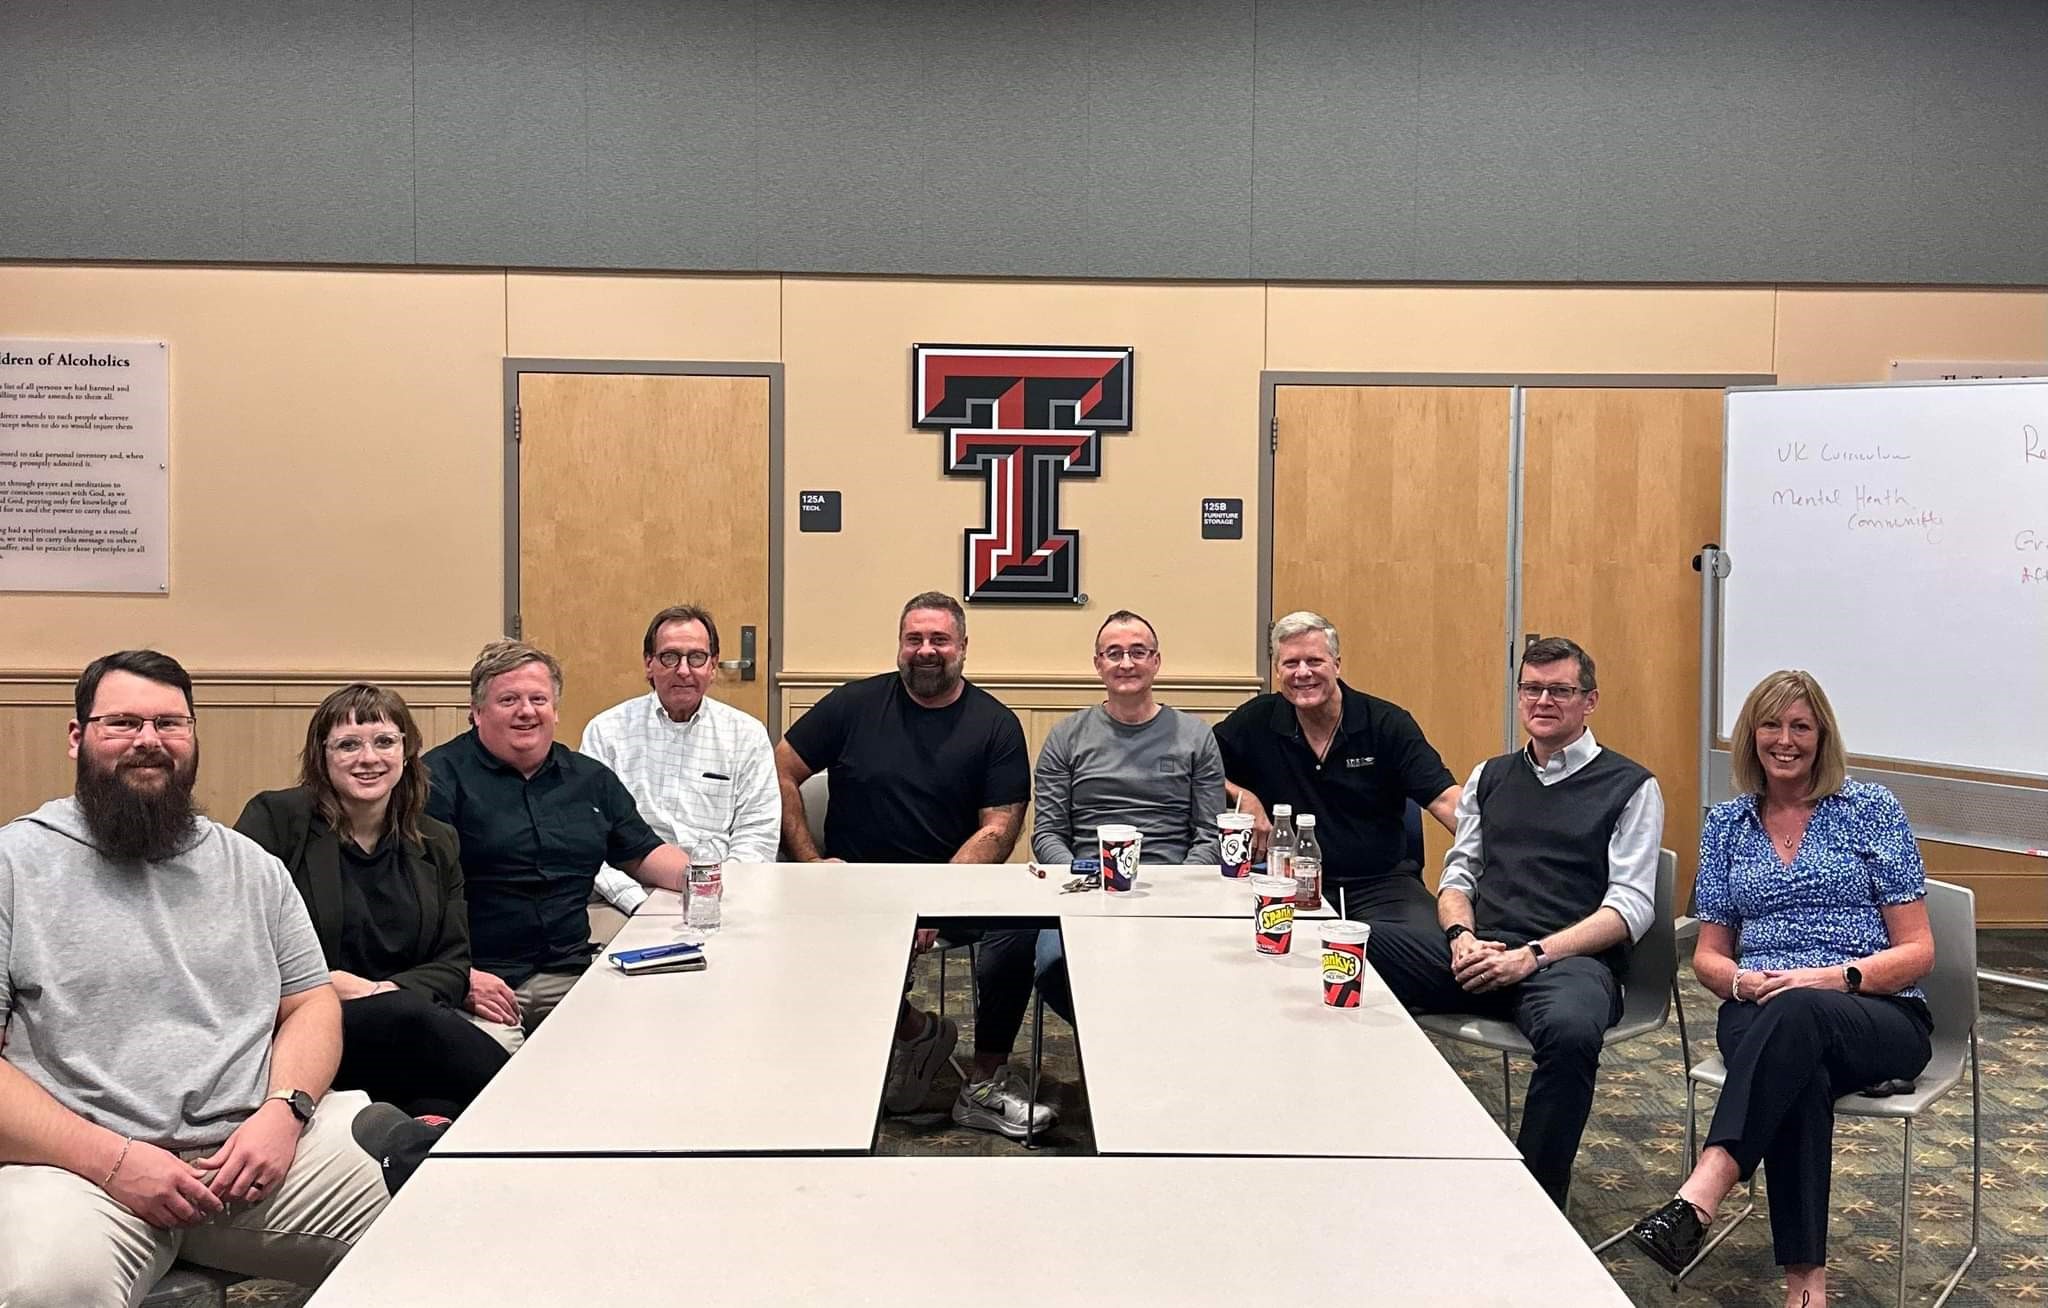 Vince Sanchez, Professor Tom Kimball, Professor George Comiskey and students from Texas Tech University gathered together.